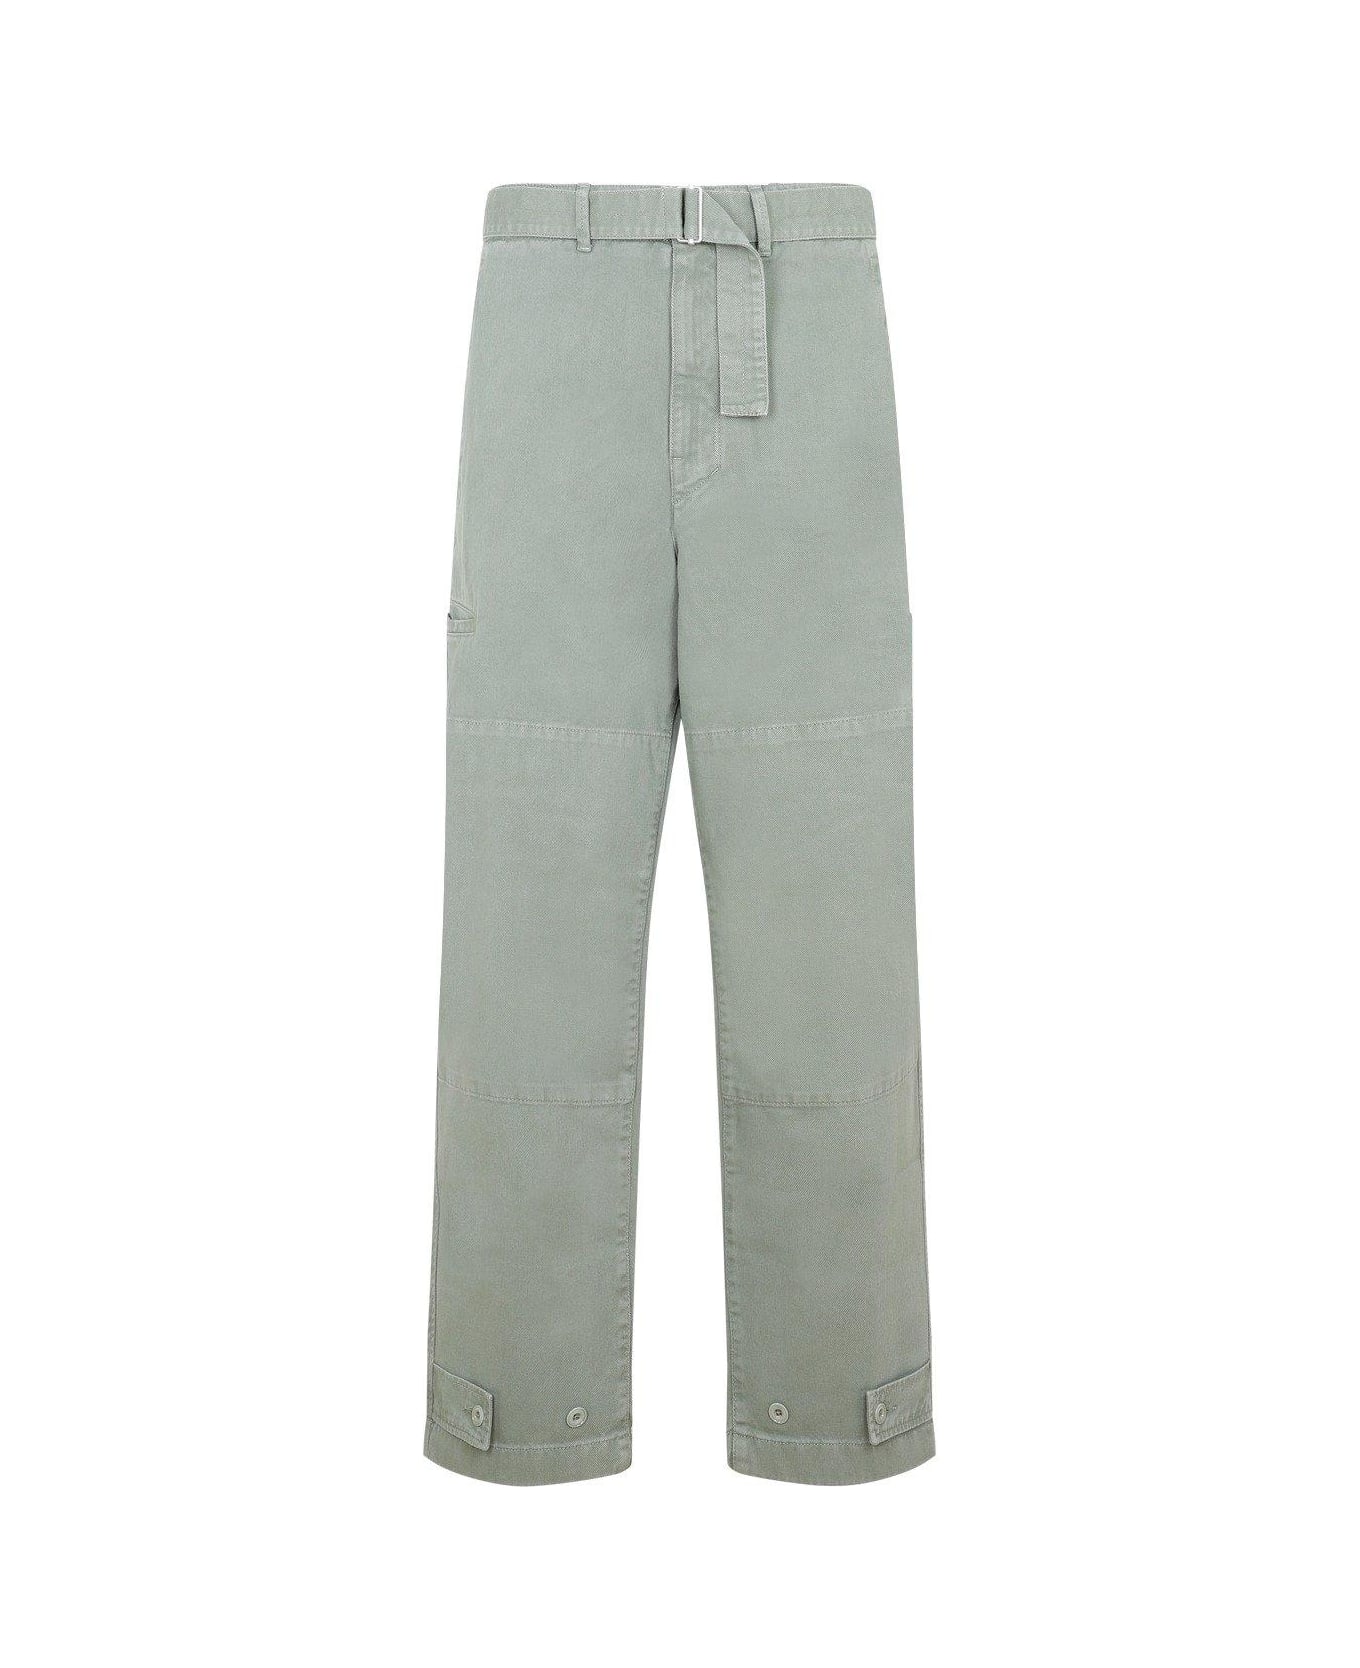 Lemaire Mllitary Pants - Hedge Green